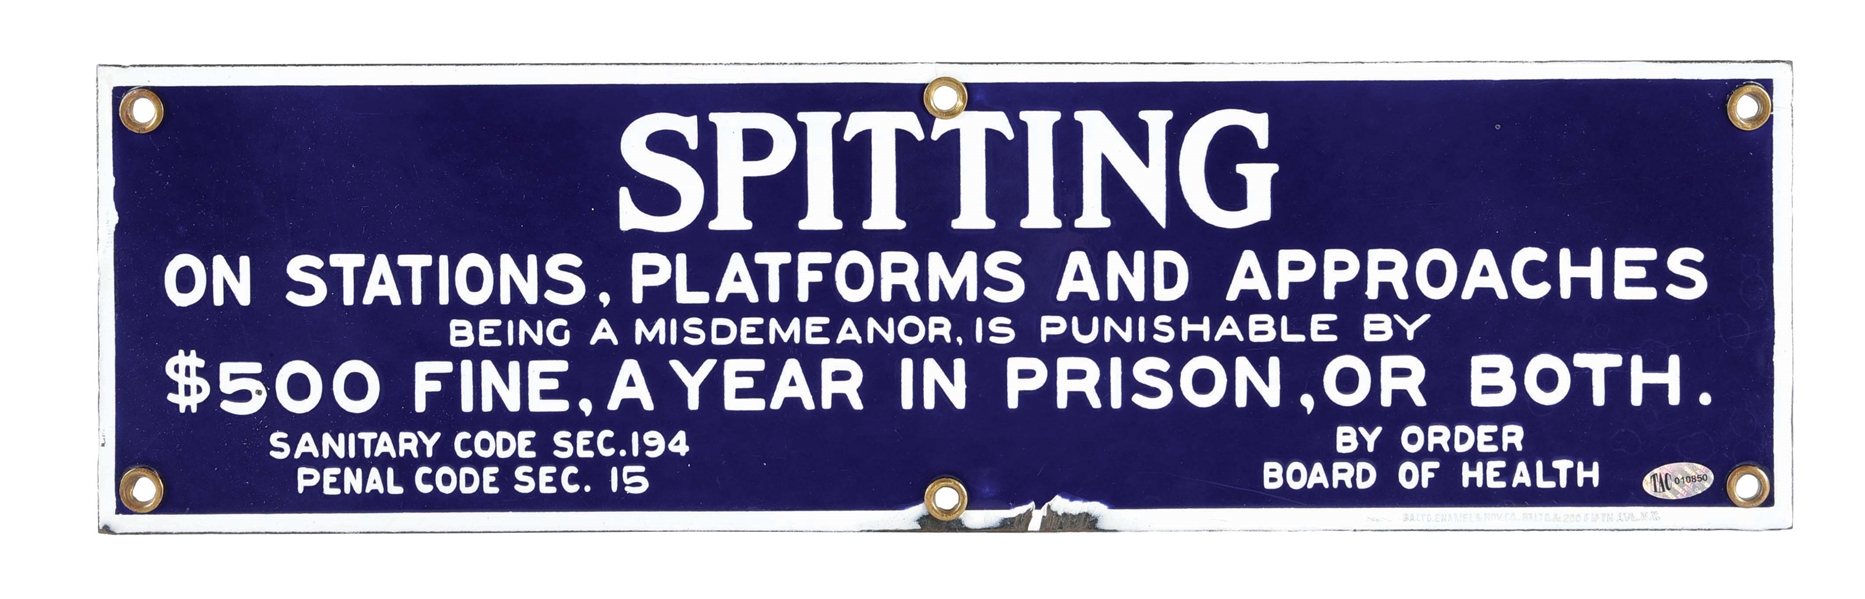 SPITTING ON STATIONS, PLATFORMS, AND APPROACHES PORCELAIN RAILWAY WARNING SIGN.